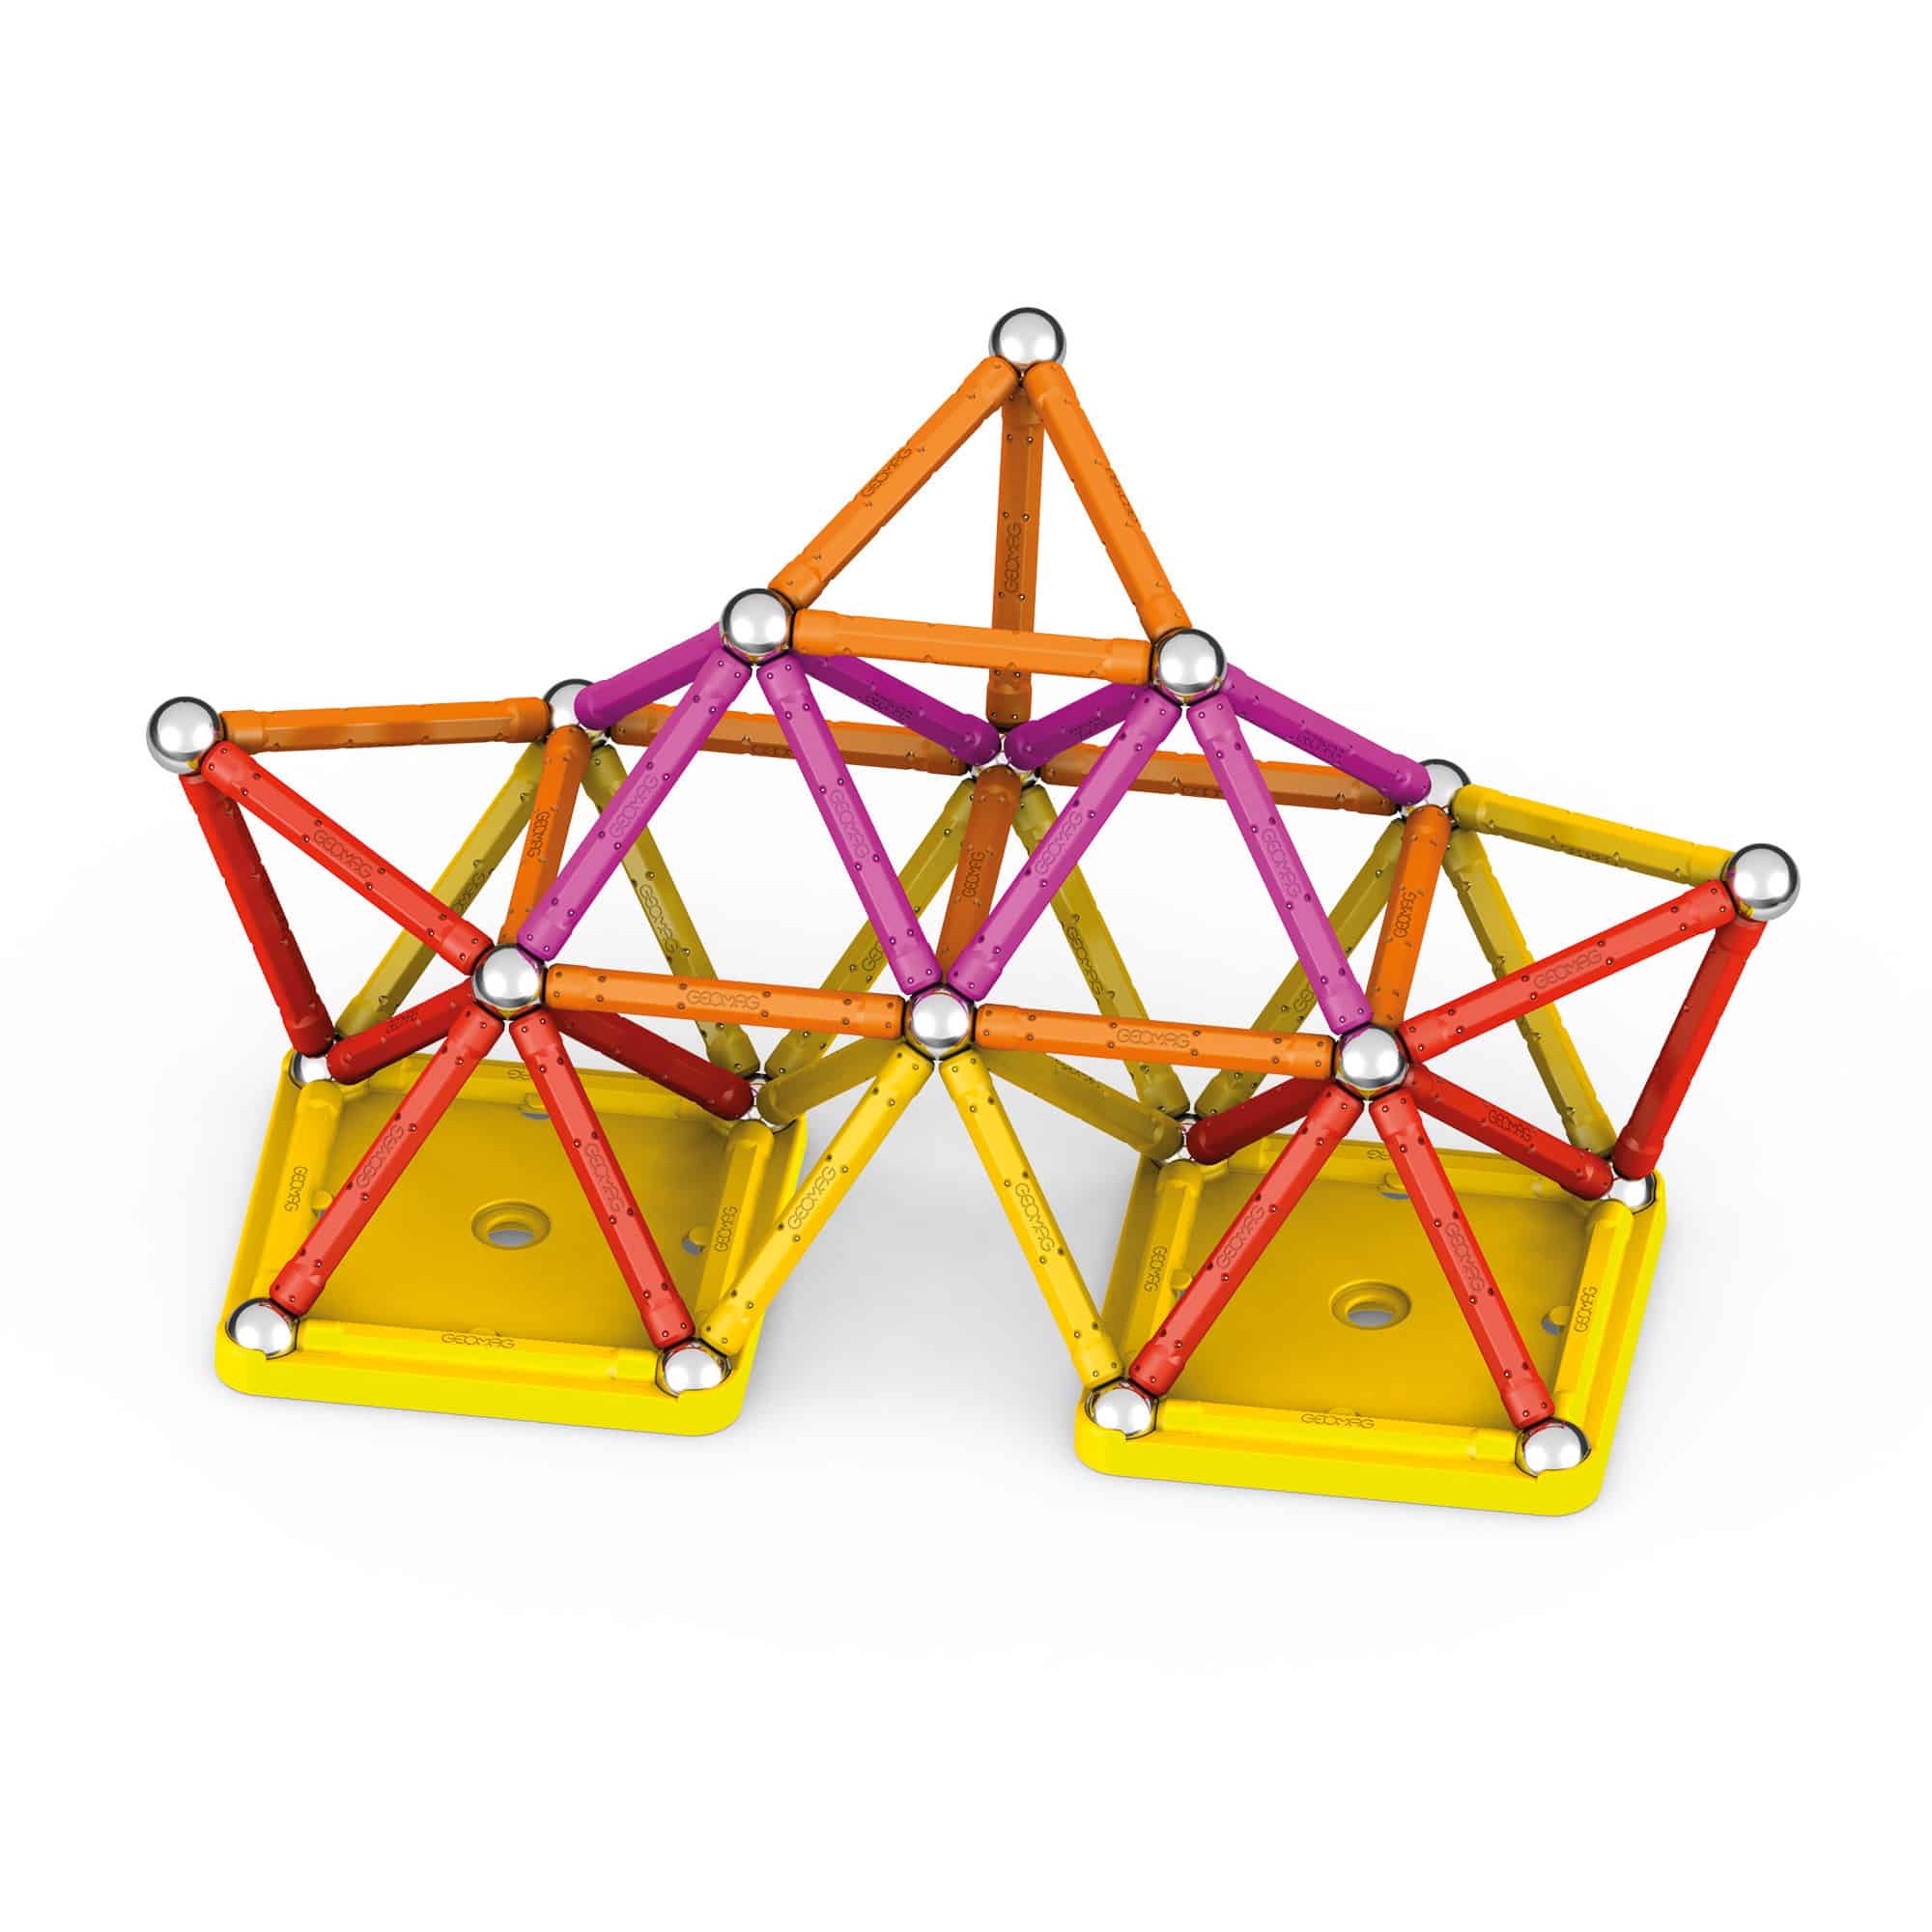 Geomag - 100% Recycled Colour -  93 Piece Set